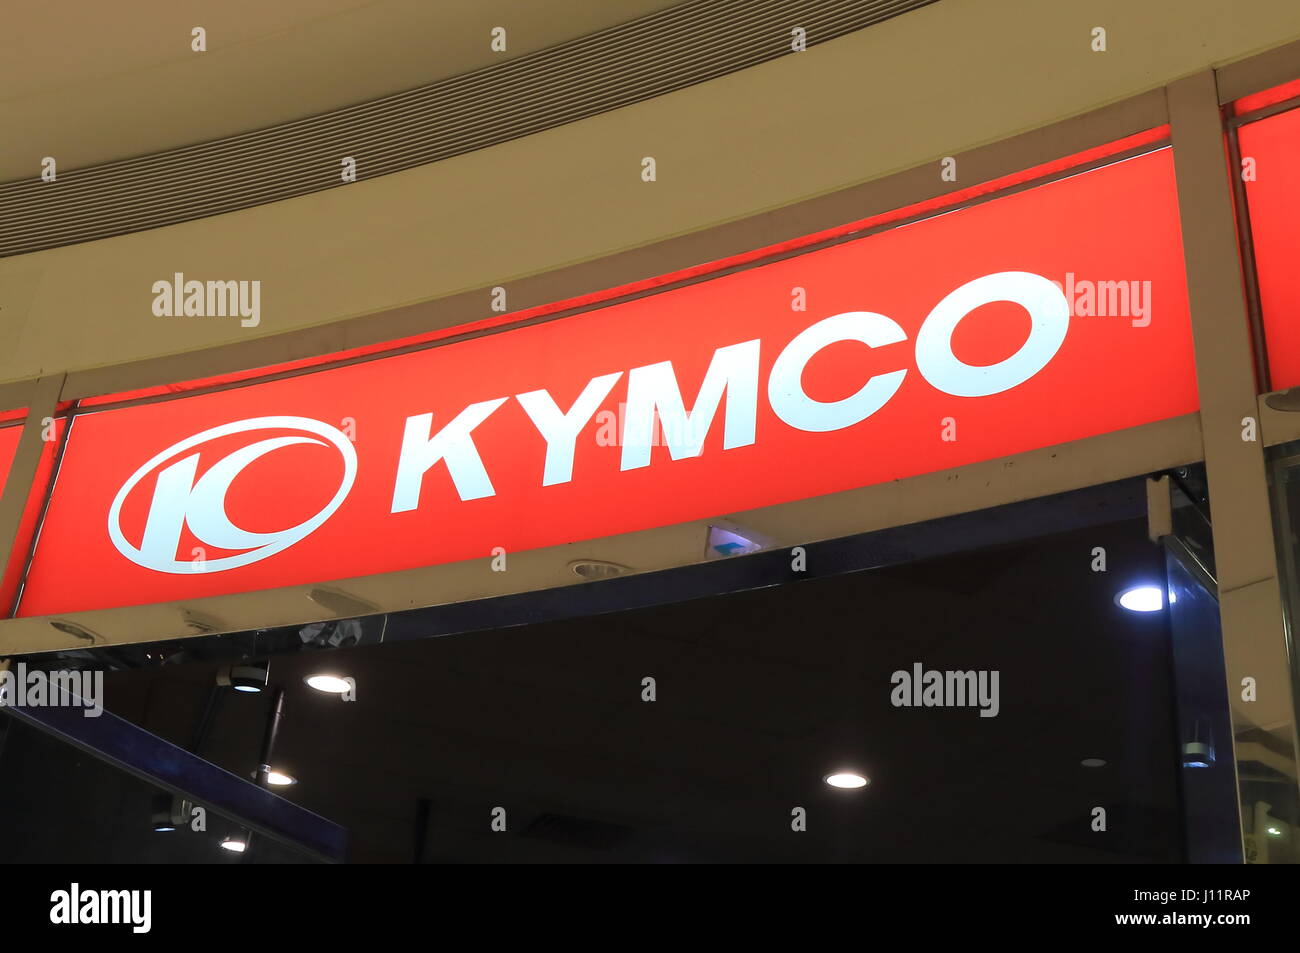 Kymco. Kymco is a Taiwanese company that manufactures motor scooters, motorcycles founded in 1963. Stock Photo